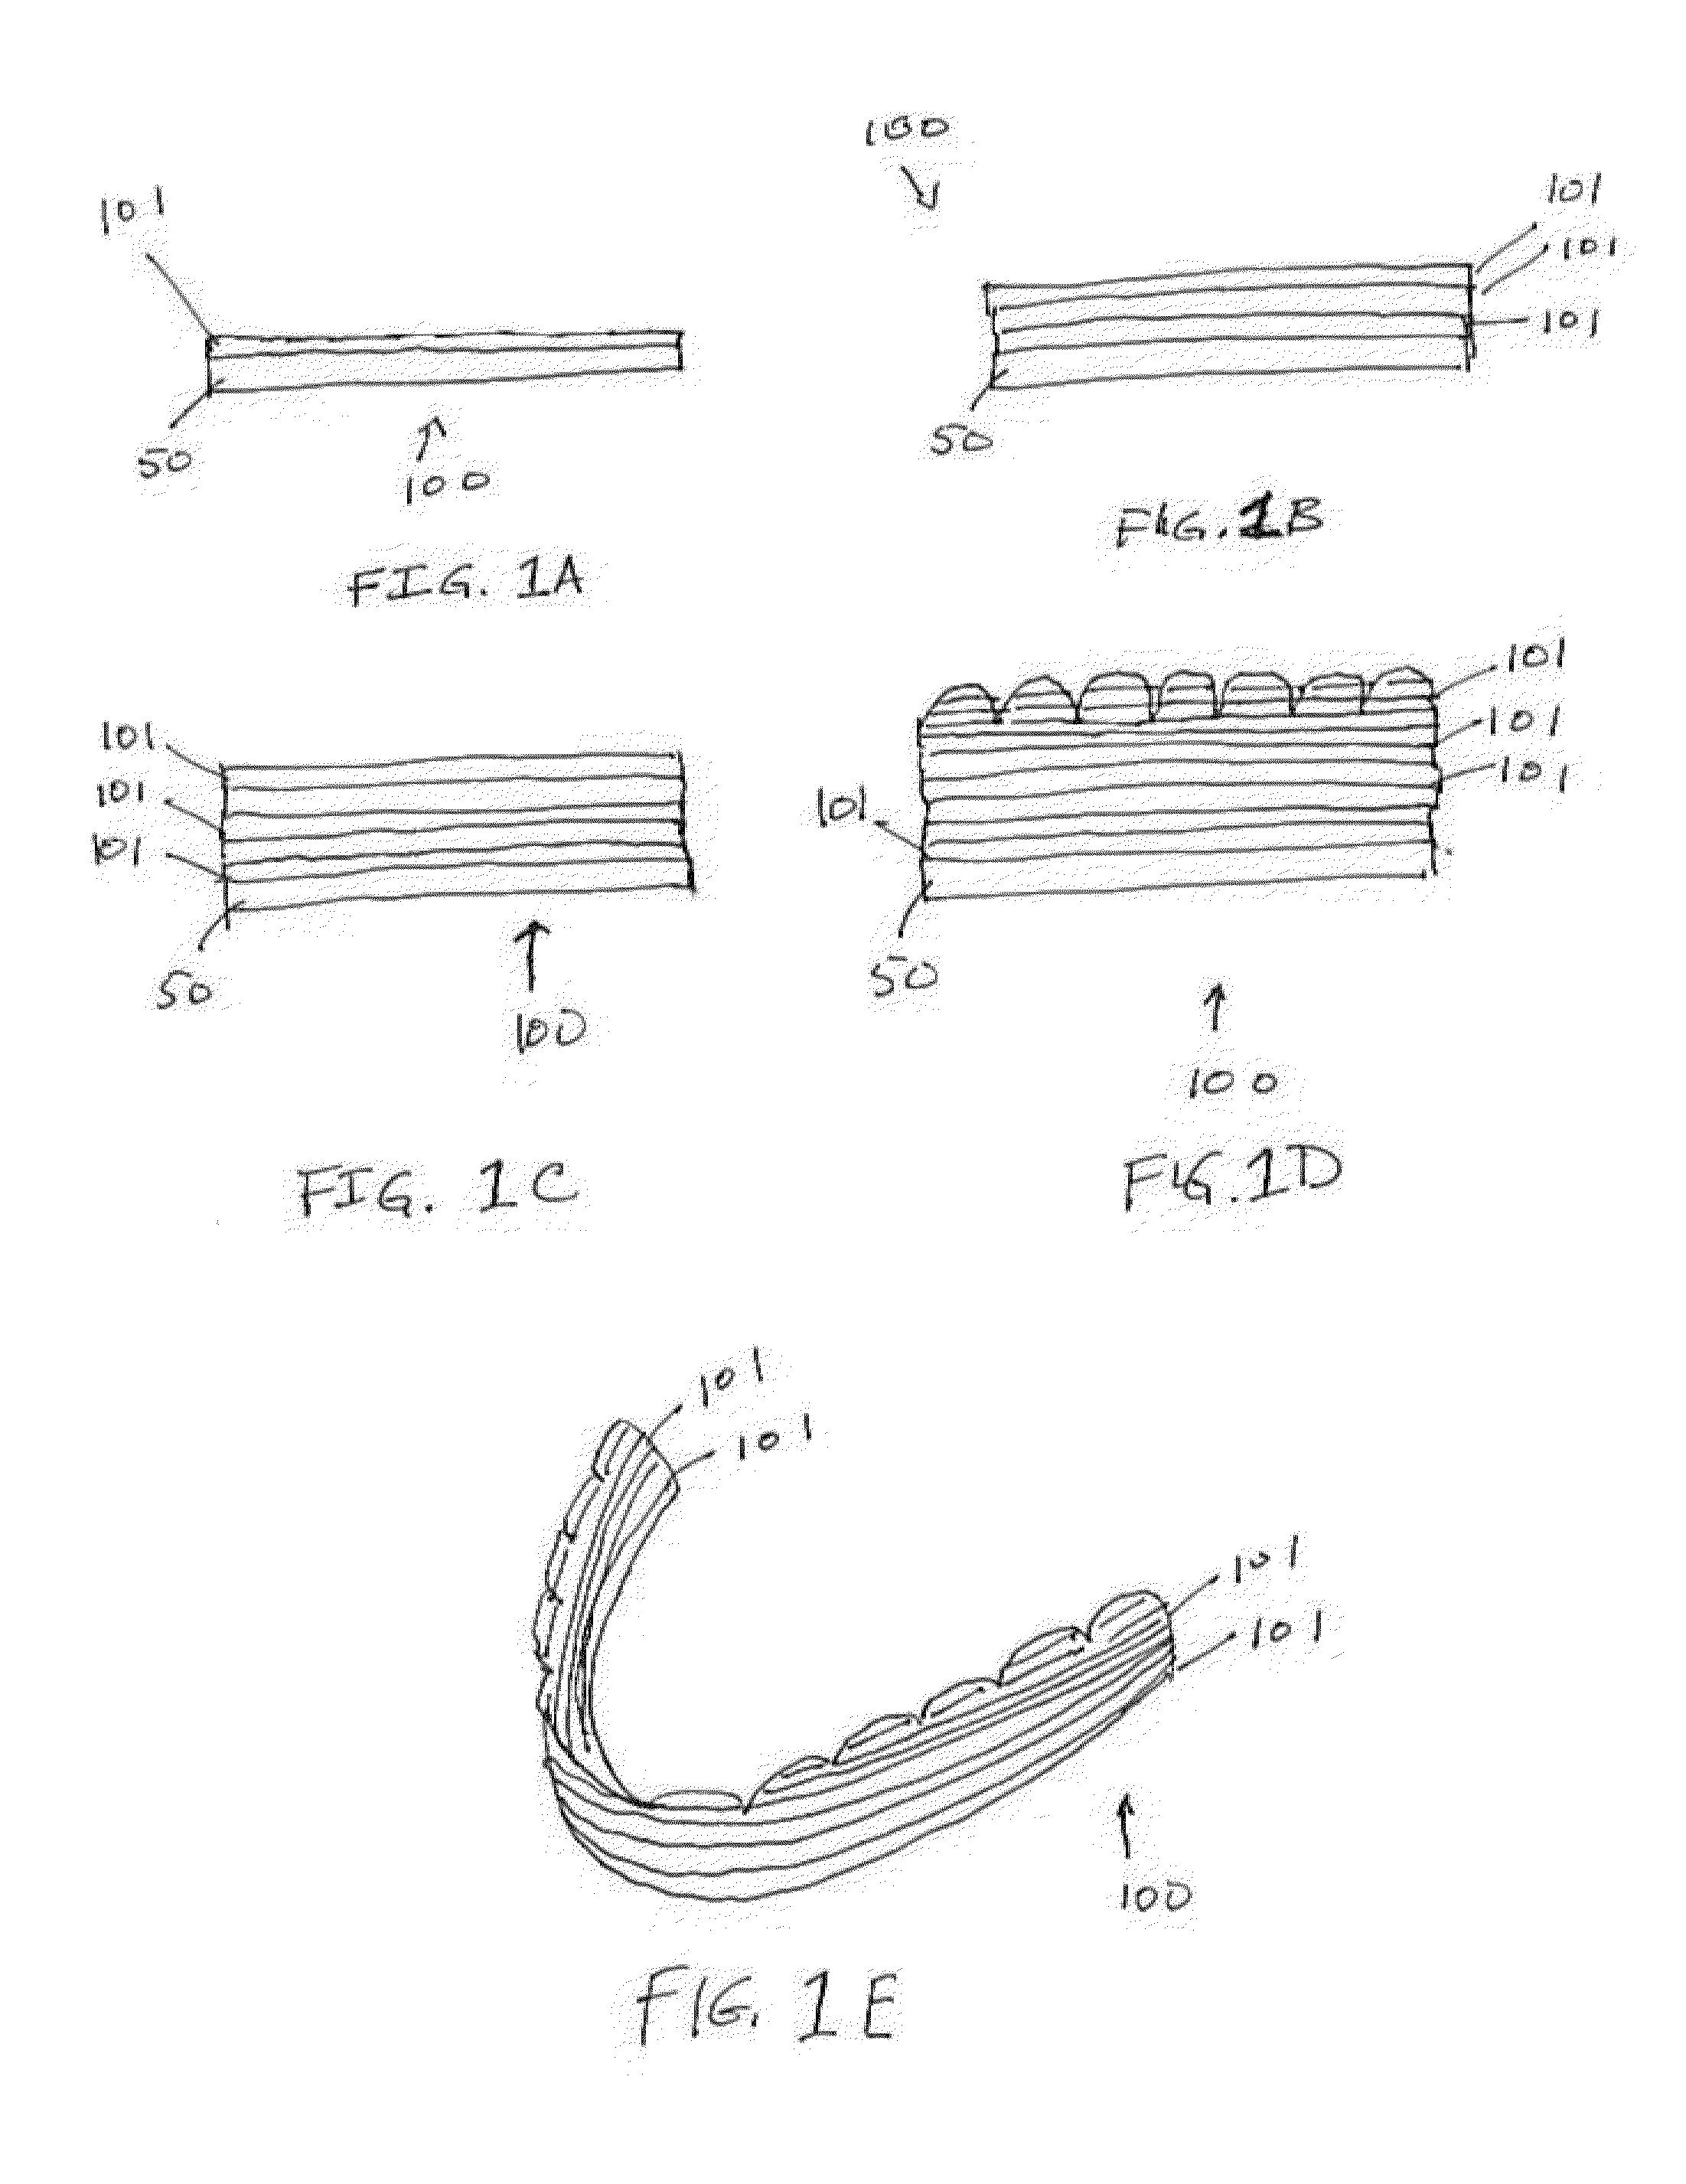 Orthodontic aligners, methods of using such aligners, and additive manufacturing methods and apparatus for making and using such aligners